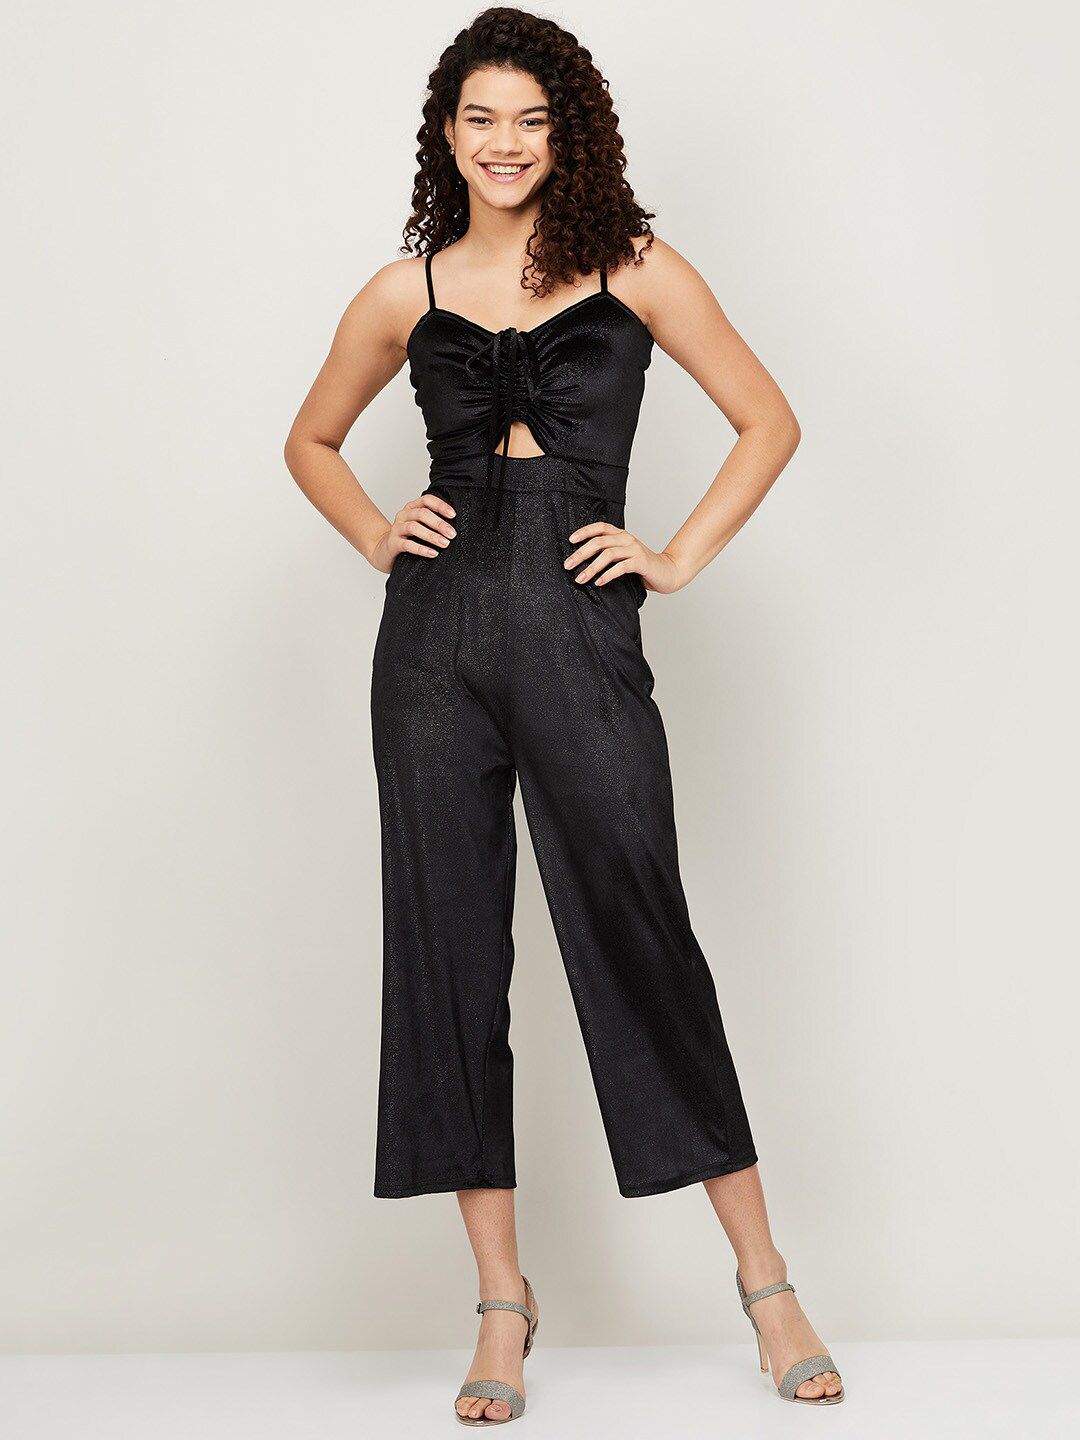 Ginger by Lifestyle Black Basic Jumpsuit Price in India